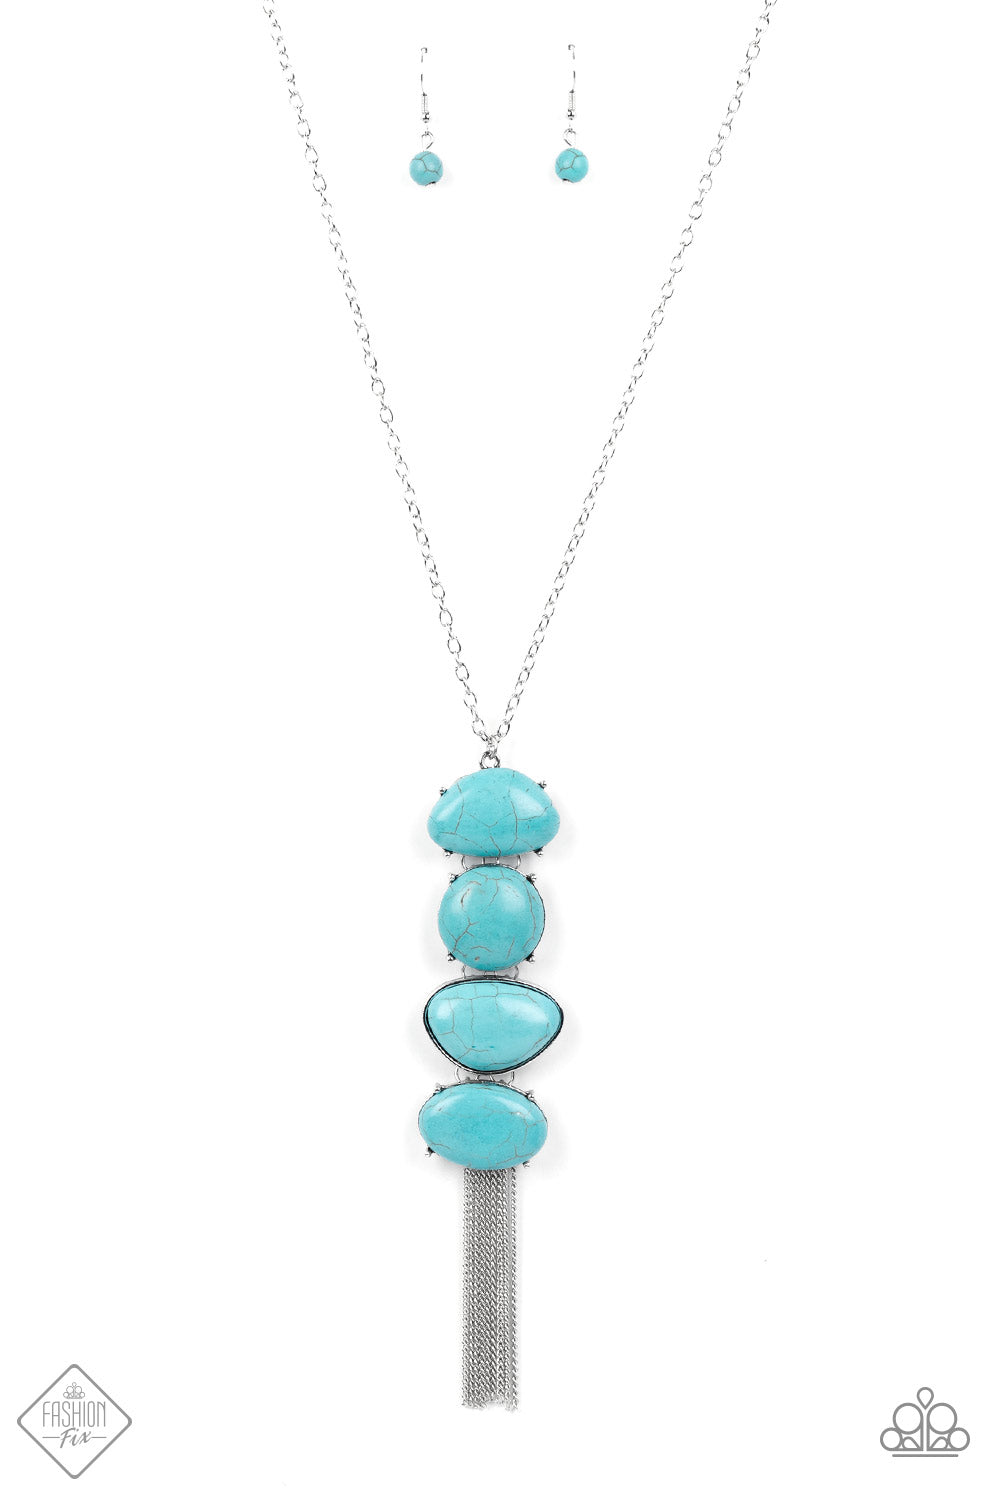 Hidden Lagoon - Blue Turquoise Stone - Silver Necklace - Paparazzi Accessories - Stacked turquoise stones create an oversized pendant that sways from the bottom of a lengthened silver chain. The irregular-shaped stones add artisanal character while a flirty fringe of dainty chains adds playful energy.